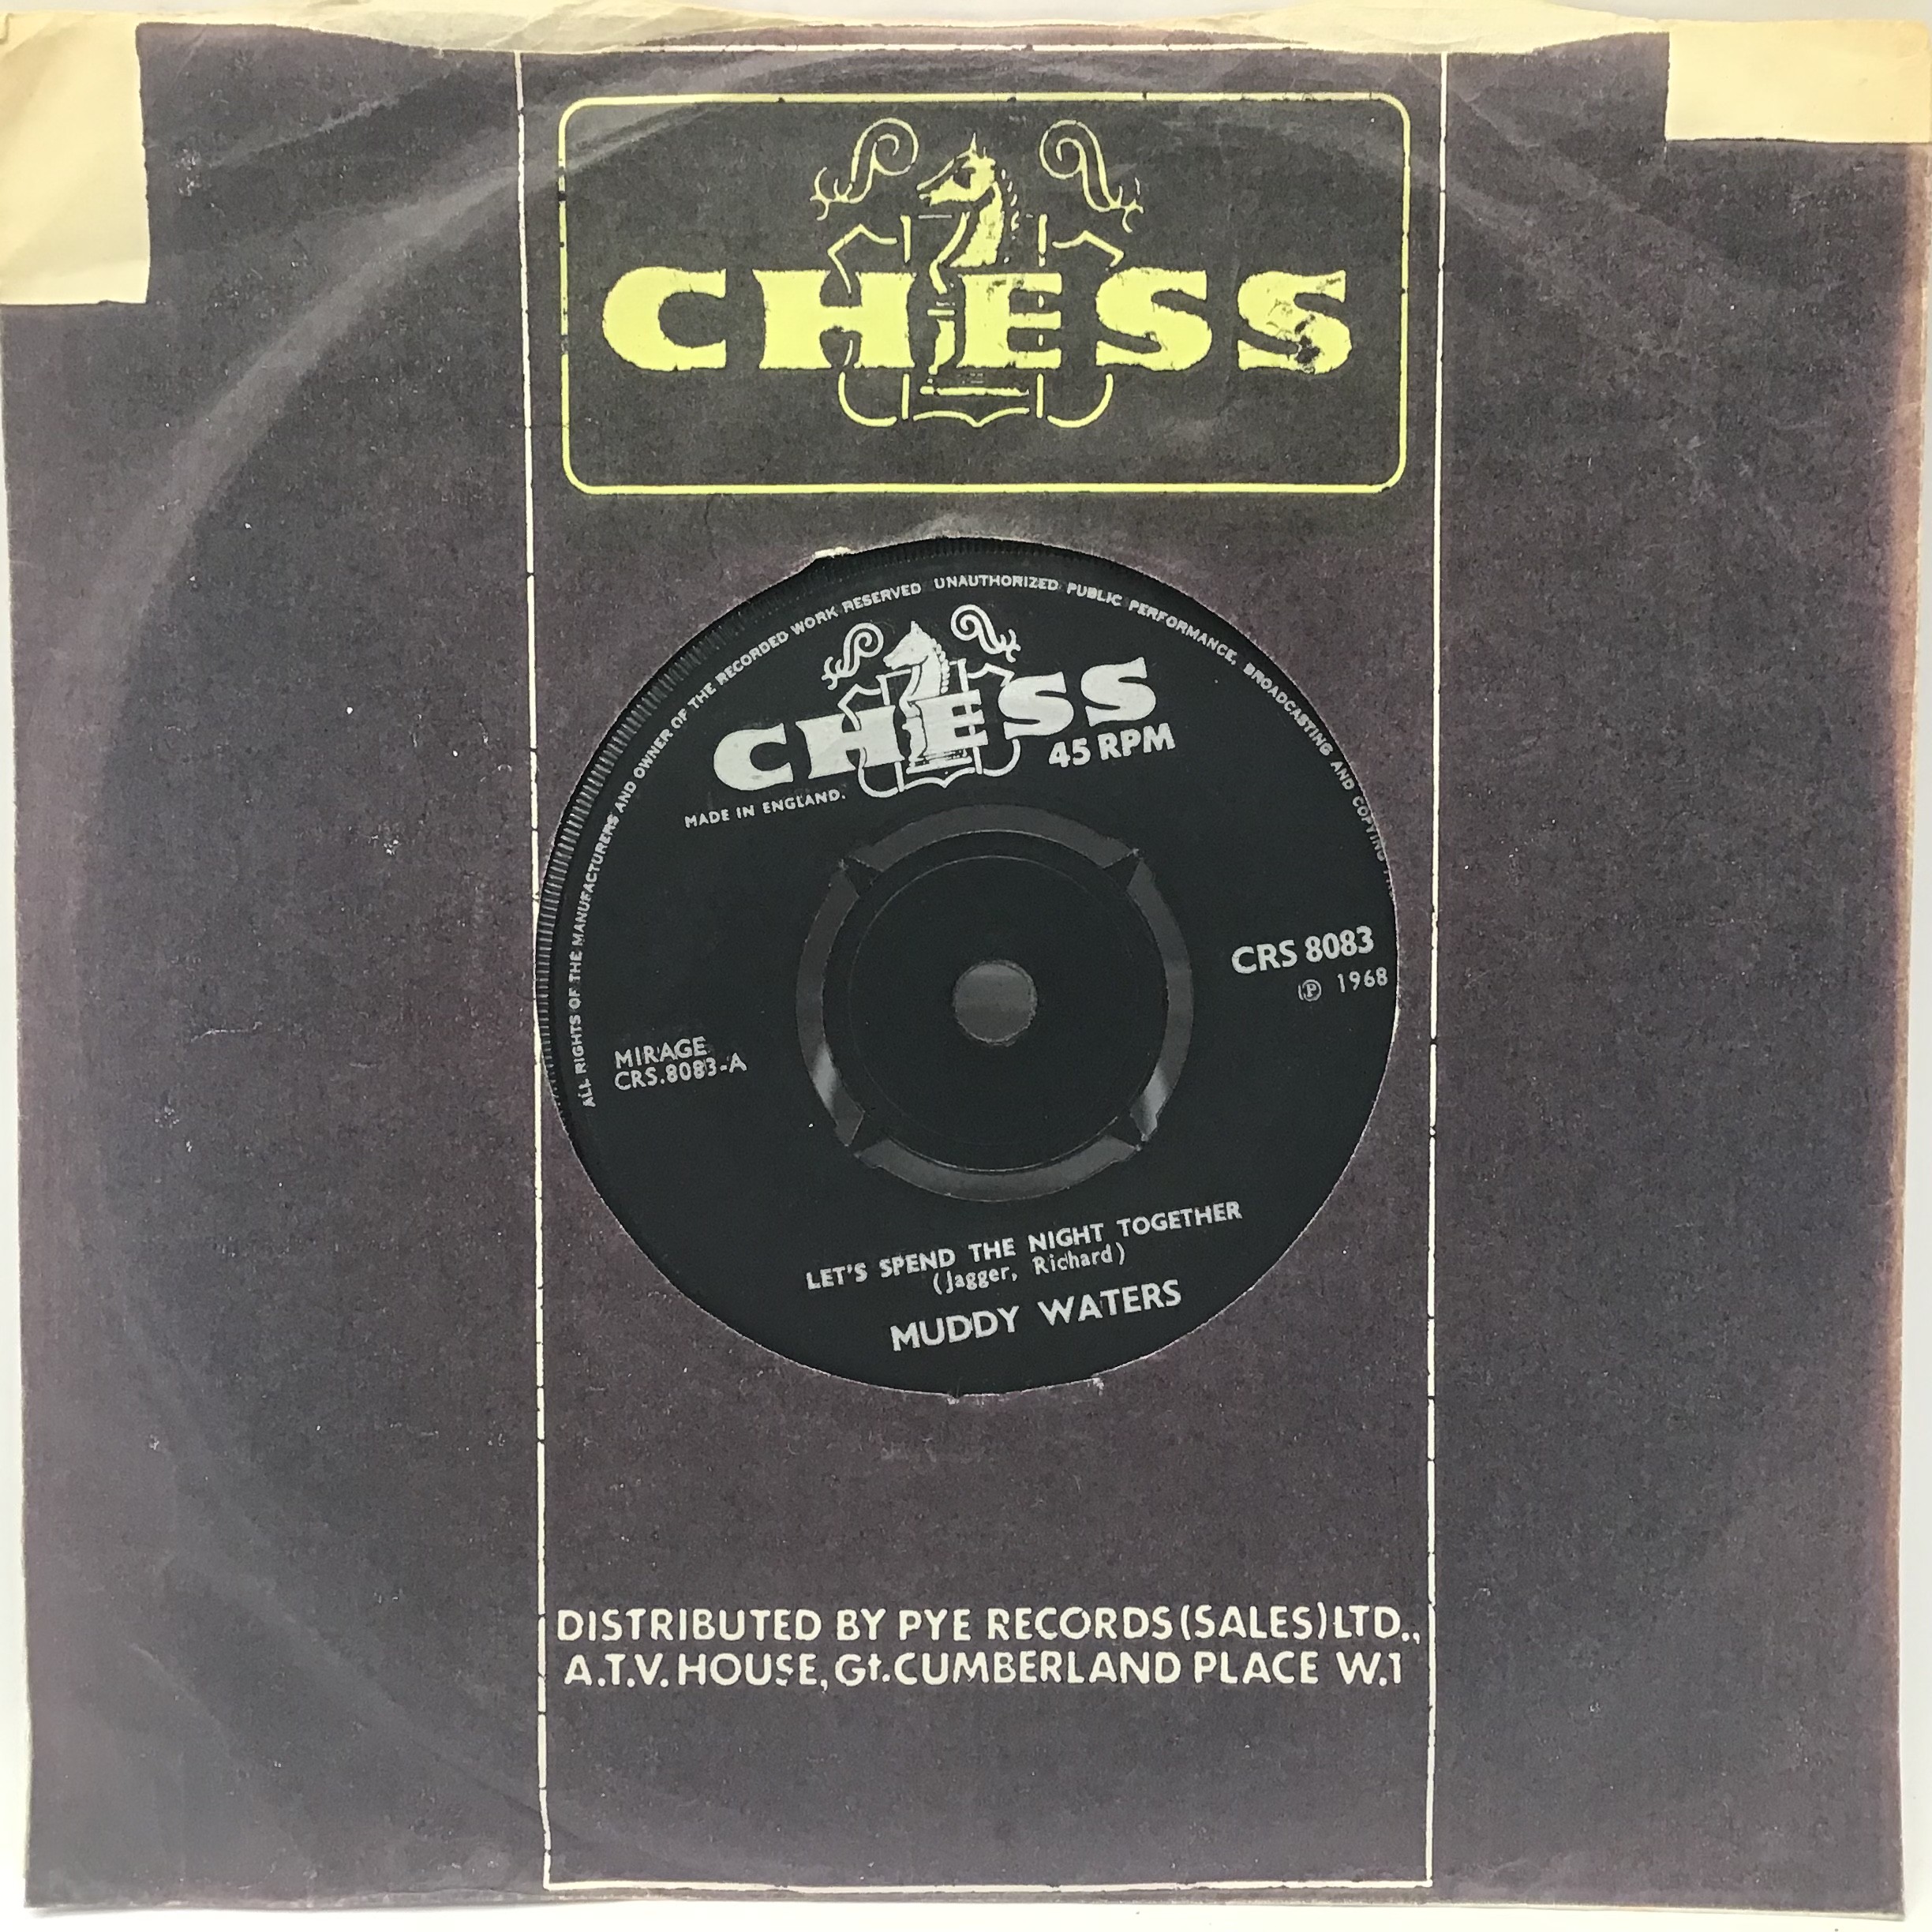 MUDDY WATERS 7" SINGLE 'LET'S SPEND THE NIGHT TOGETHER'. This Ex condition single is on Chess CRS